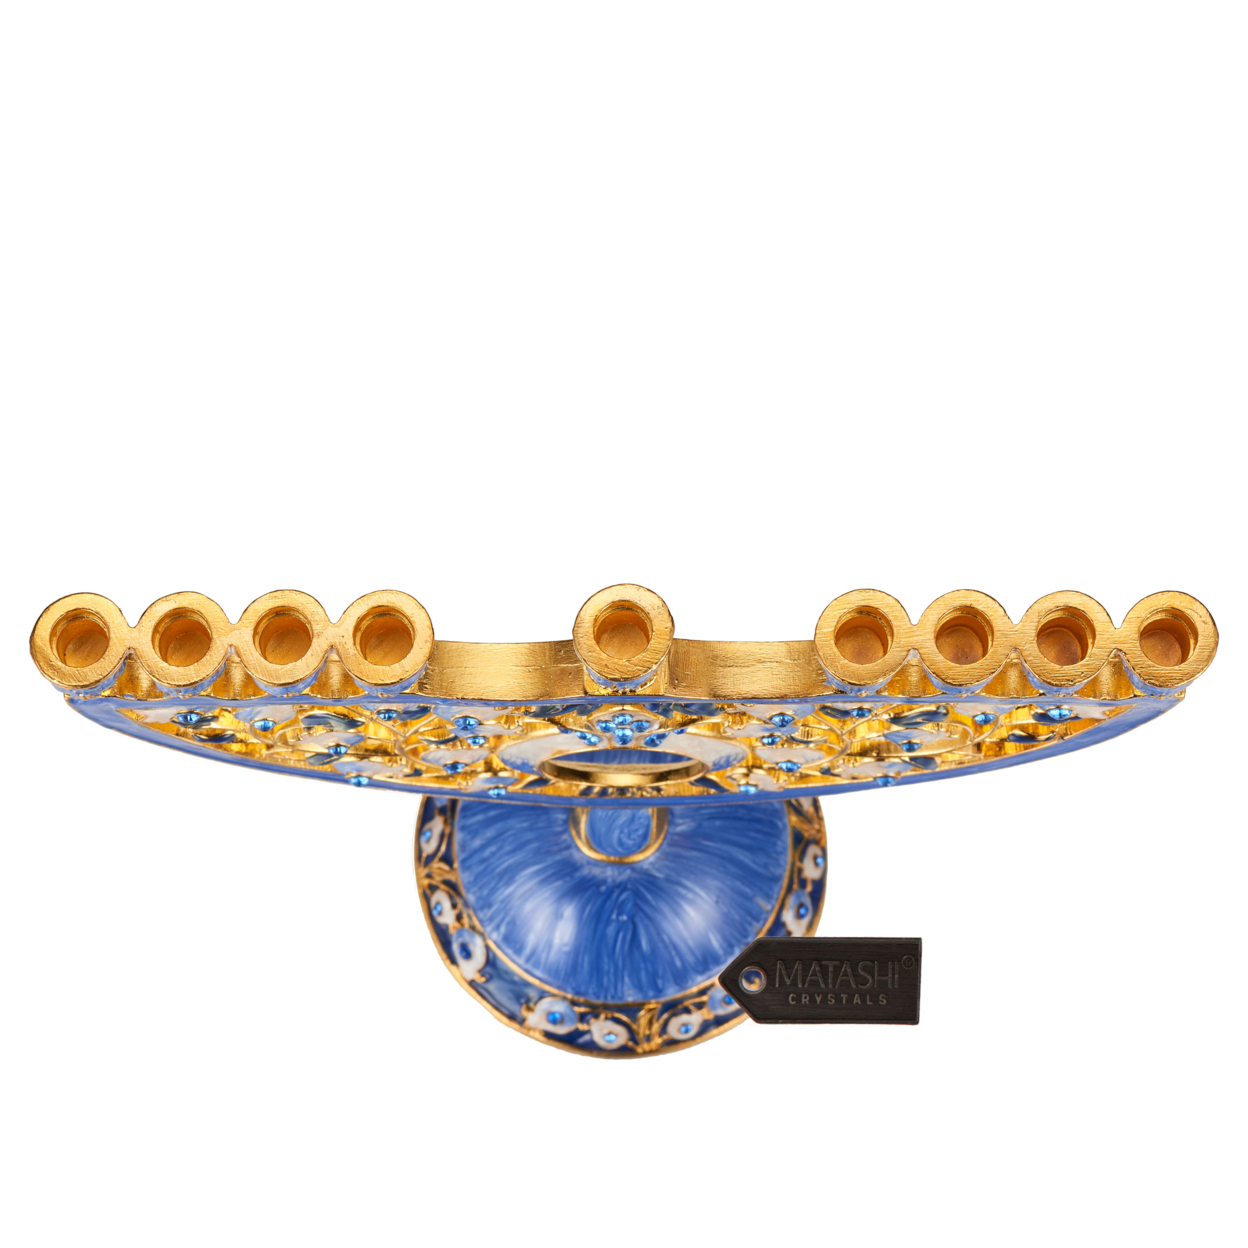 Matashi Hand Painted Blue Enamel Pomegranate Design Menorah Candelabra With Gold Accents And Crystals Jewish Candle Holder Hanukkah Gift